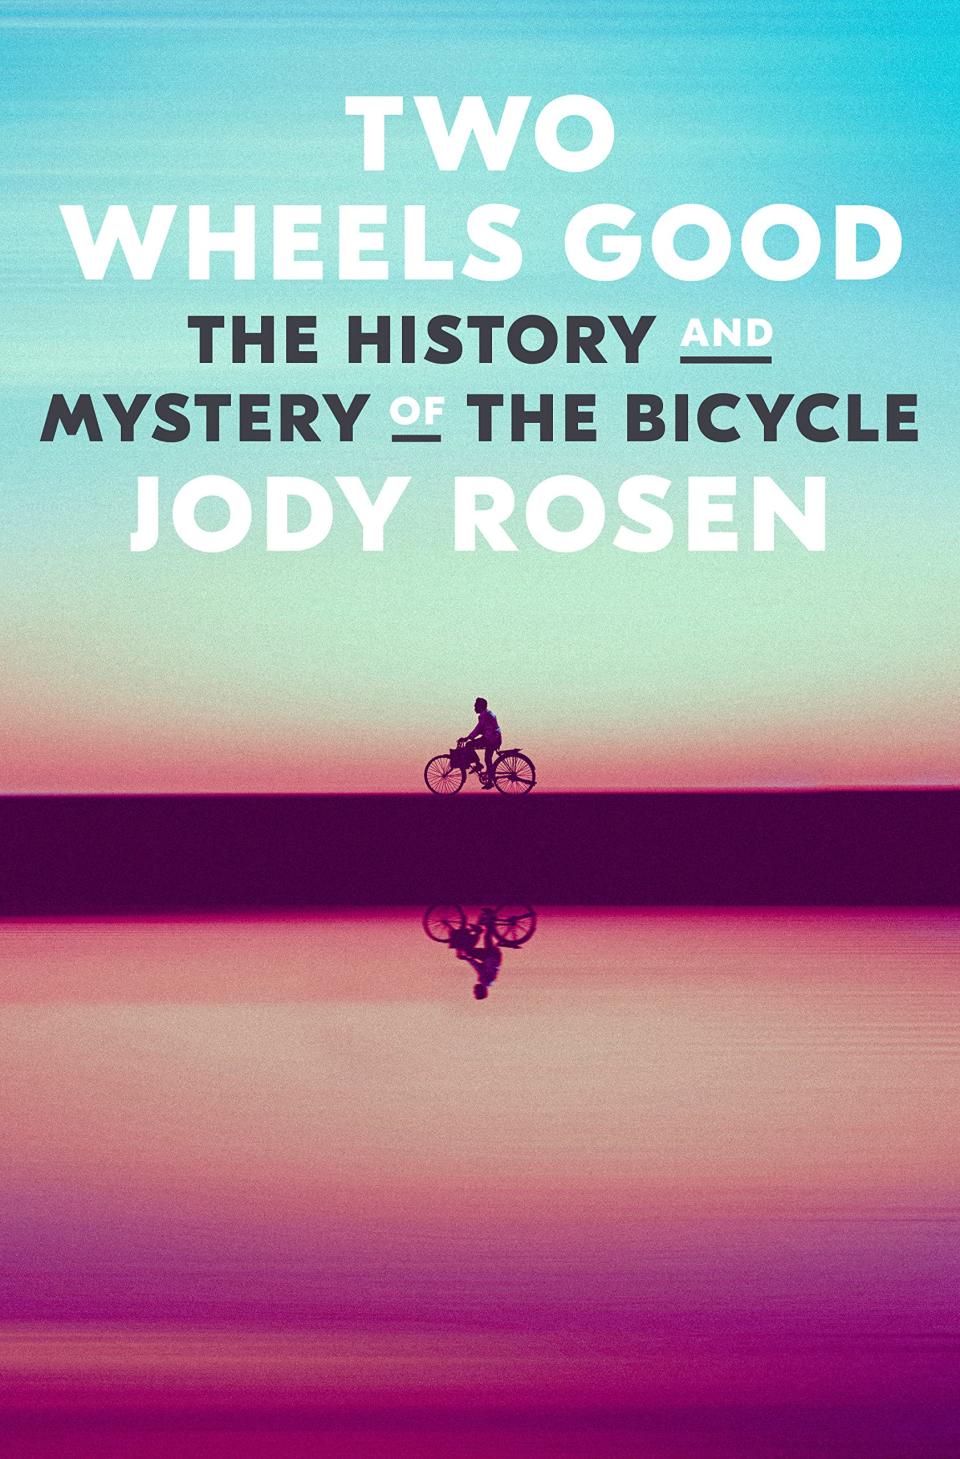 Two Wheels Good: The History and Mystery of the Bicycle,” by Jody Rosen